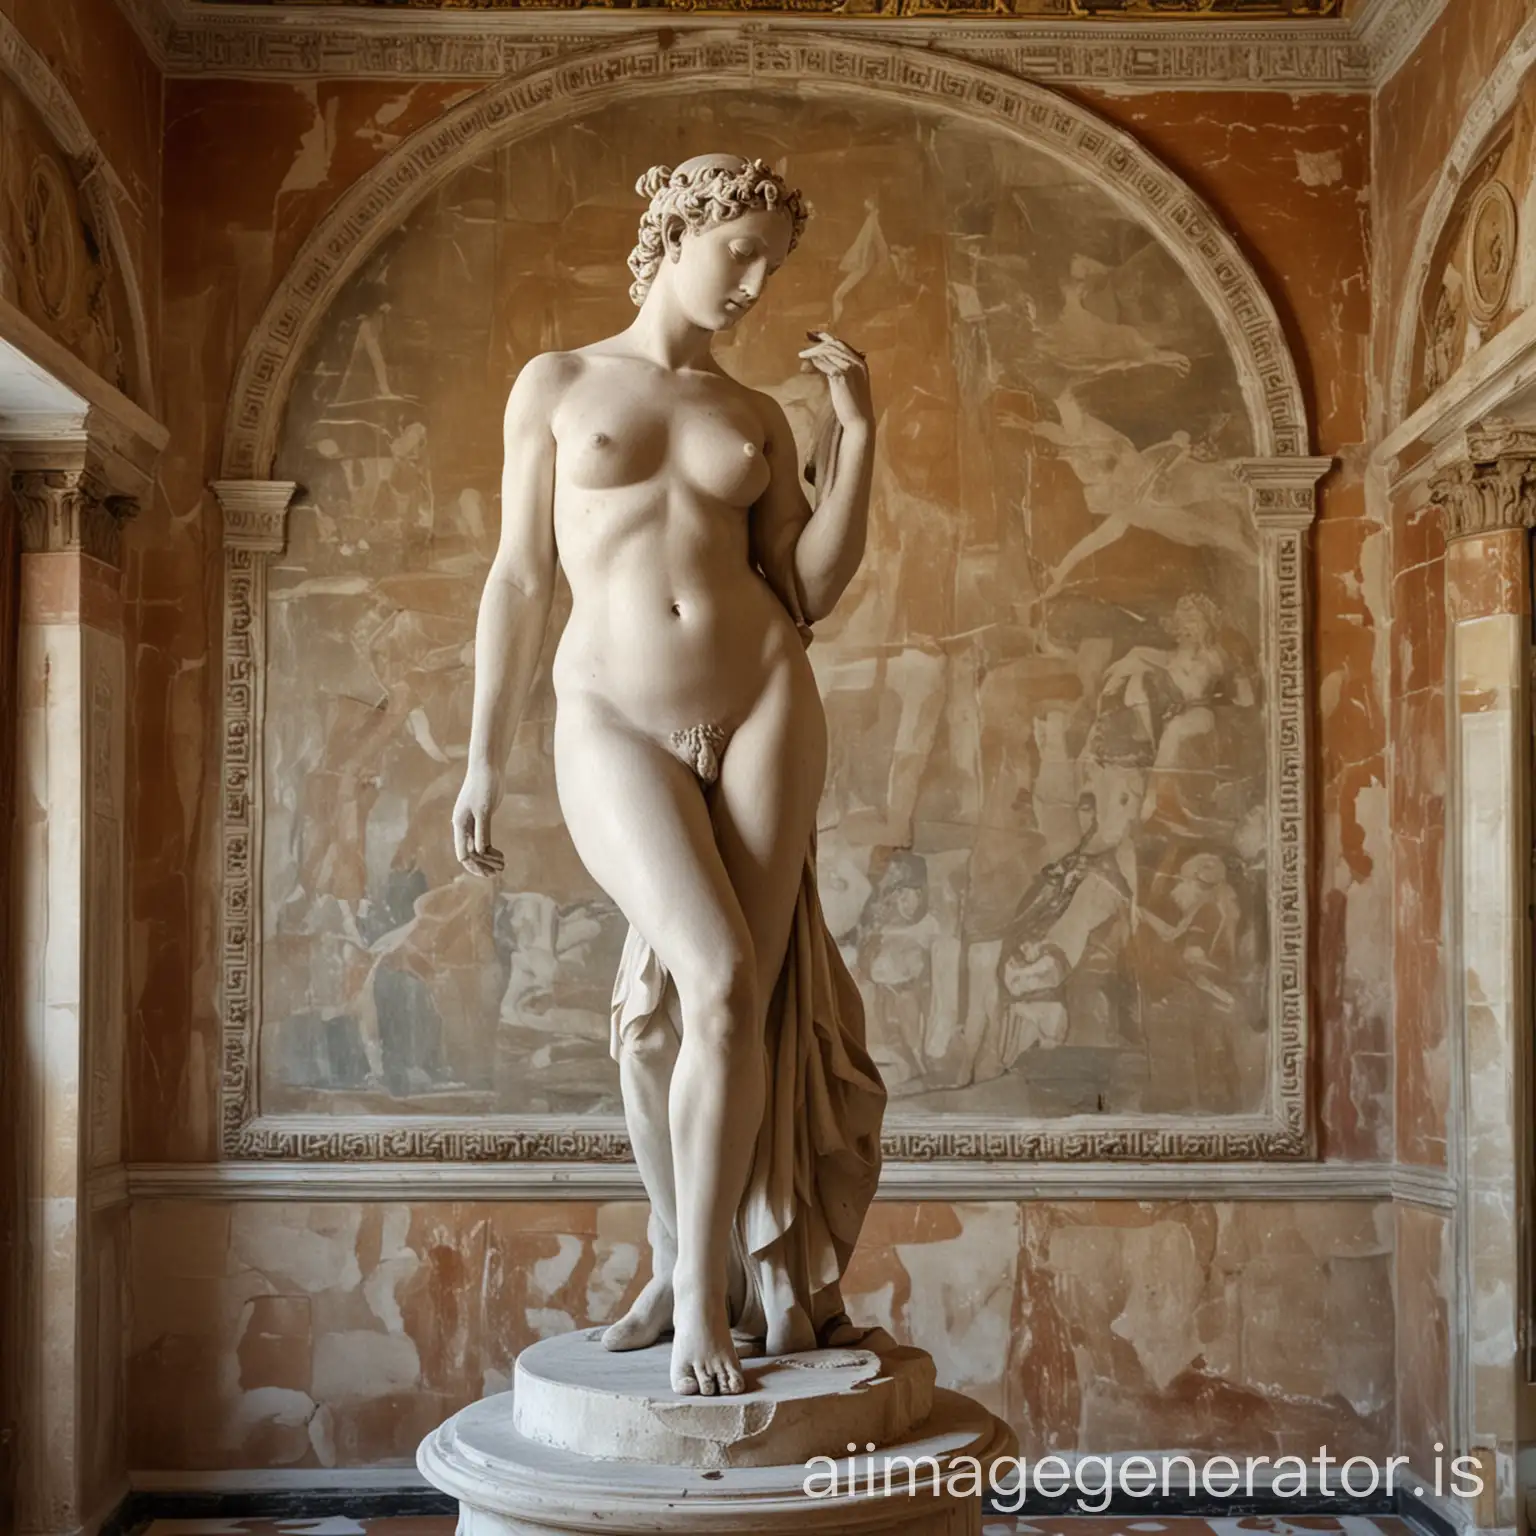 greek statue in stone of nude woman in renaissance artistic room at day